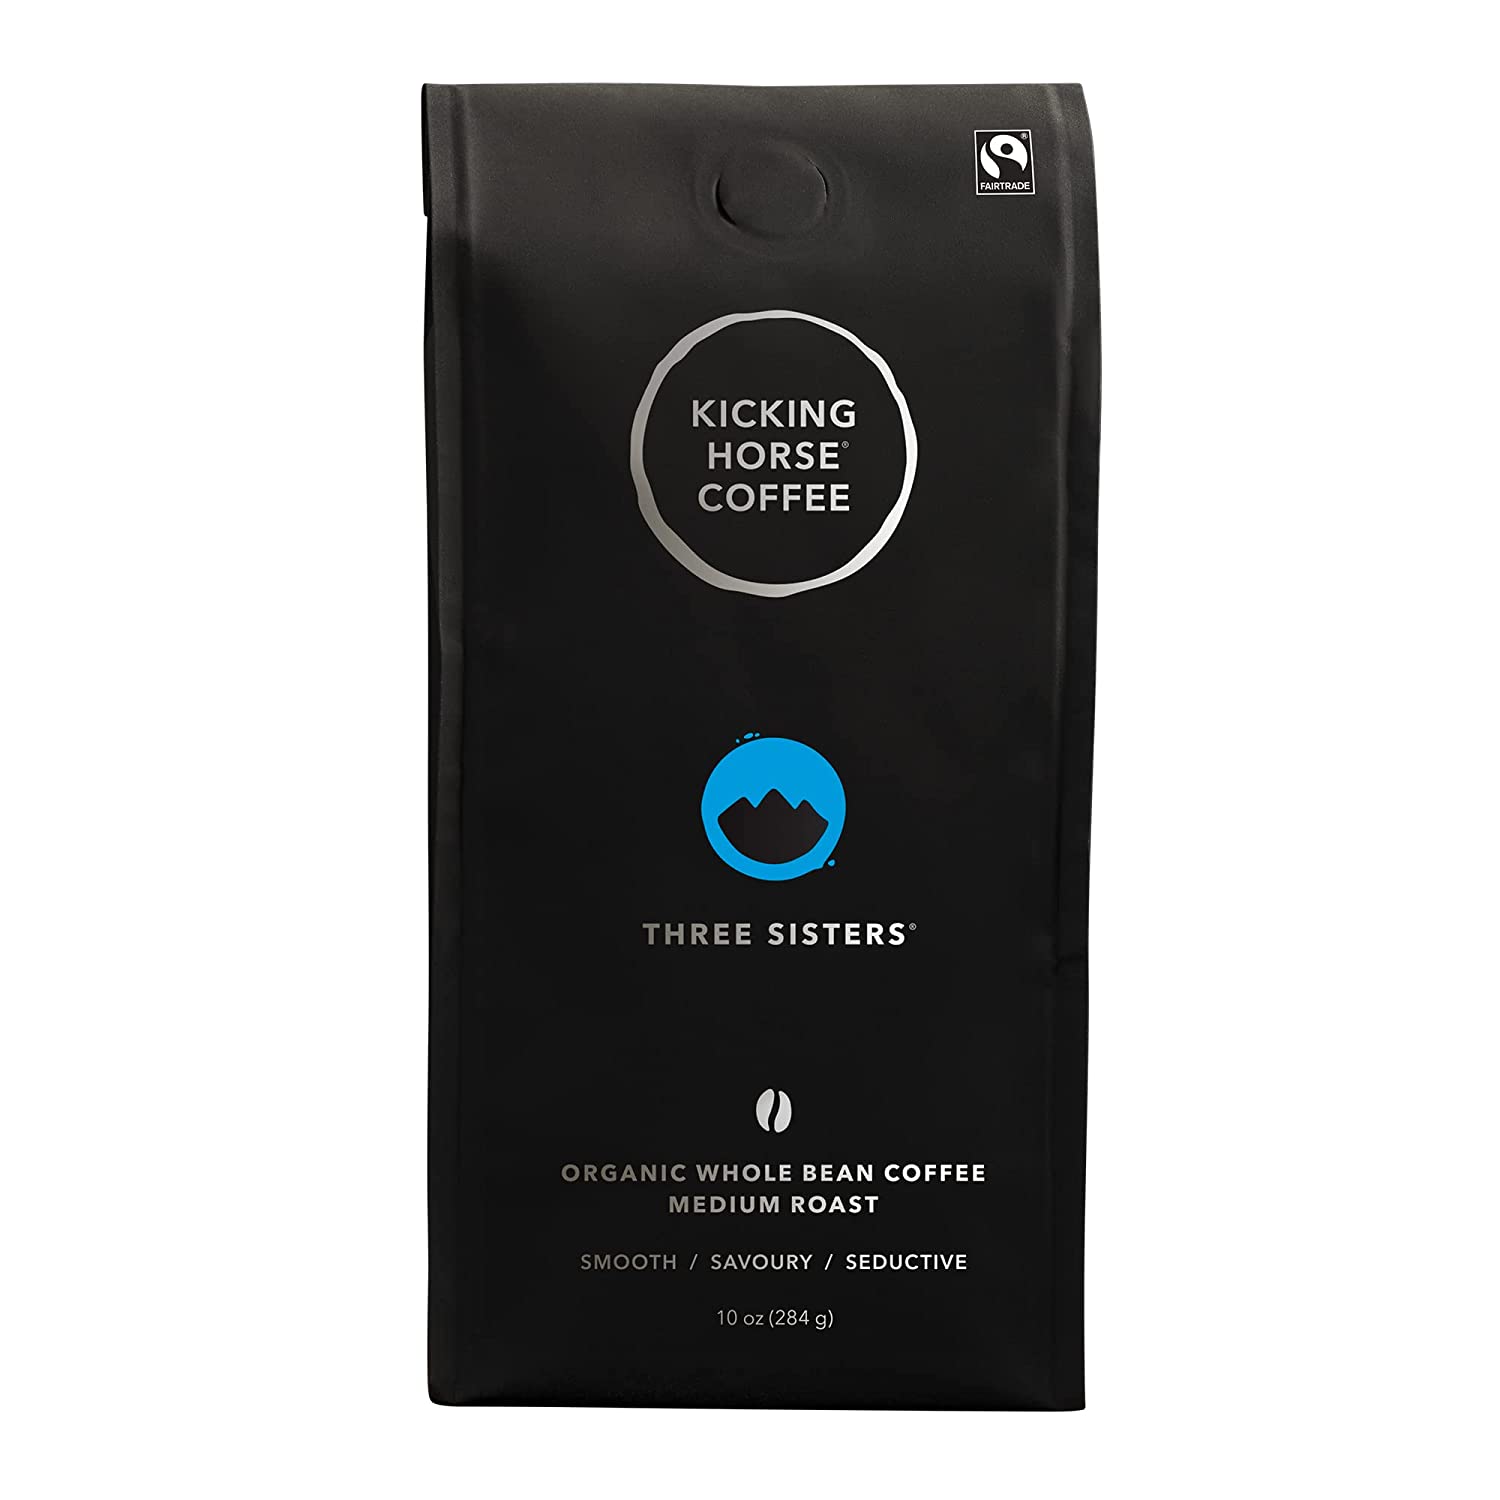 kicking horse coffee whole beans bag - three sisters is the name of this medium roast bean